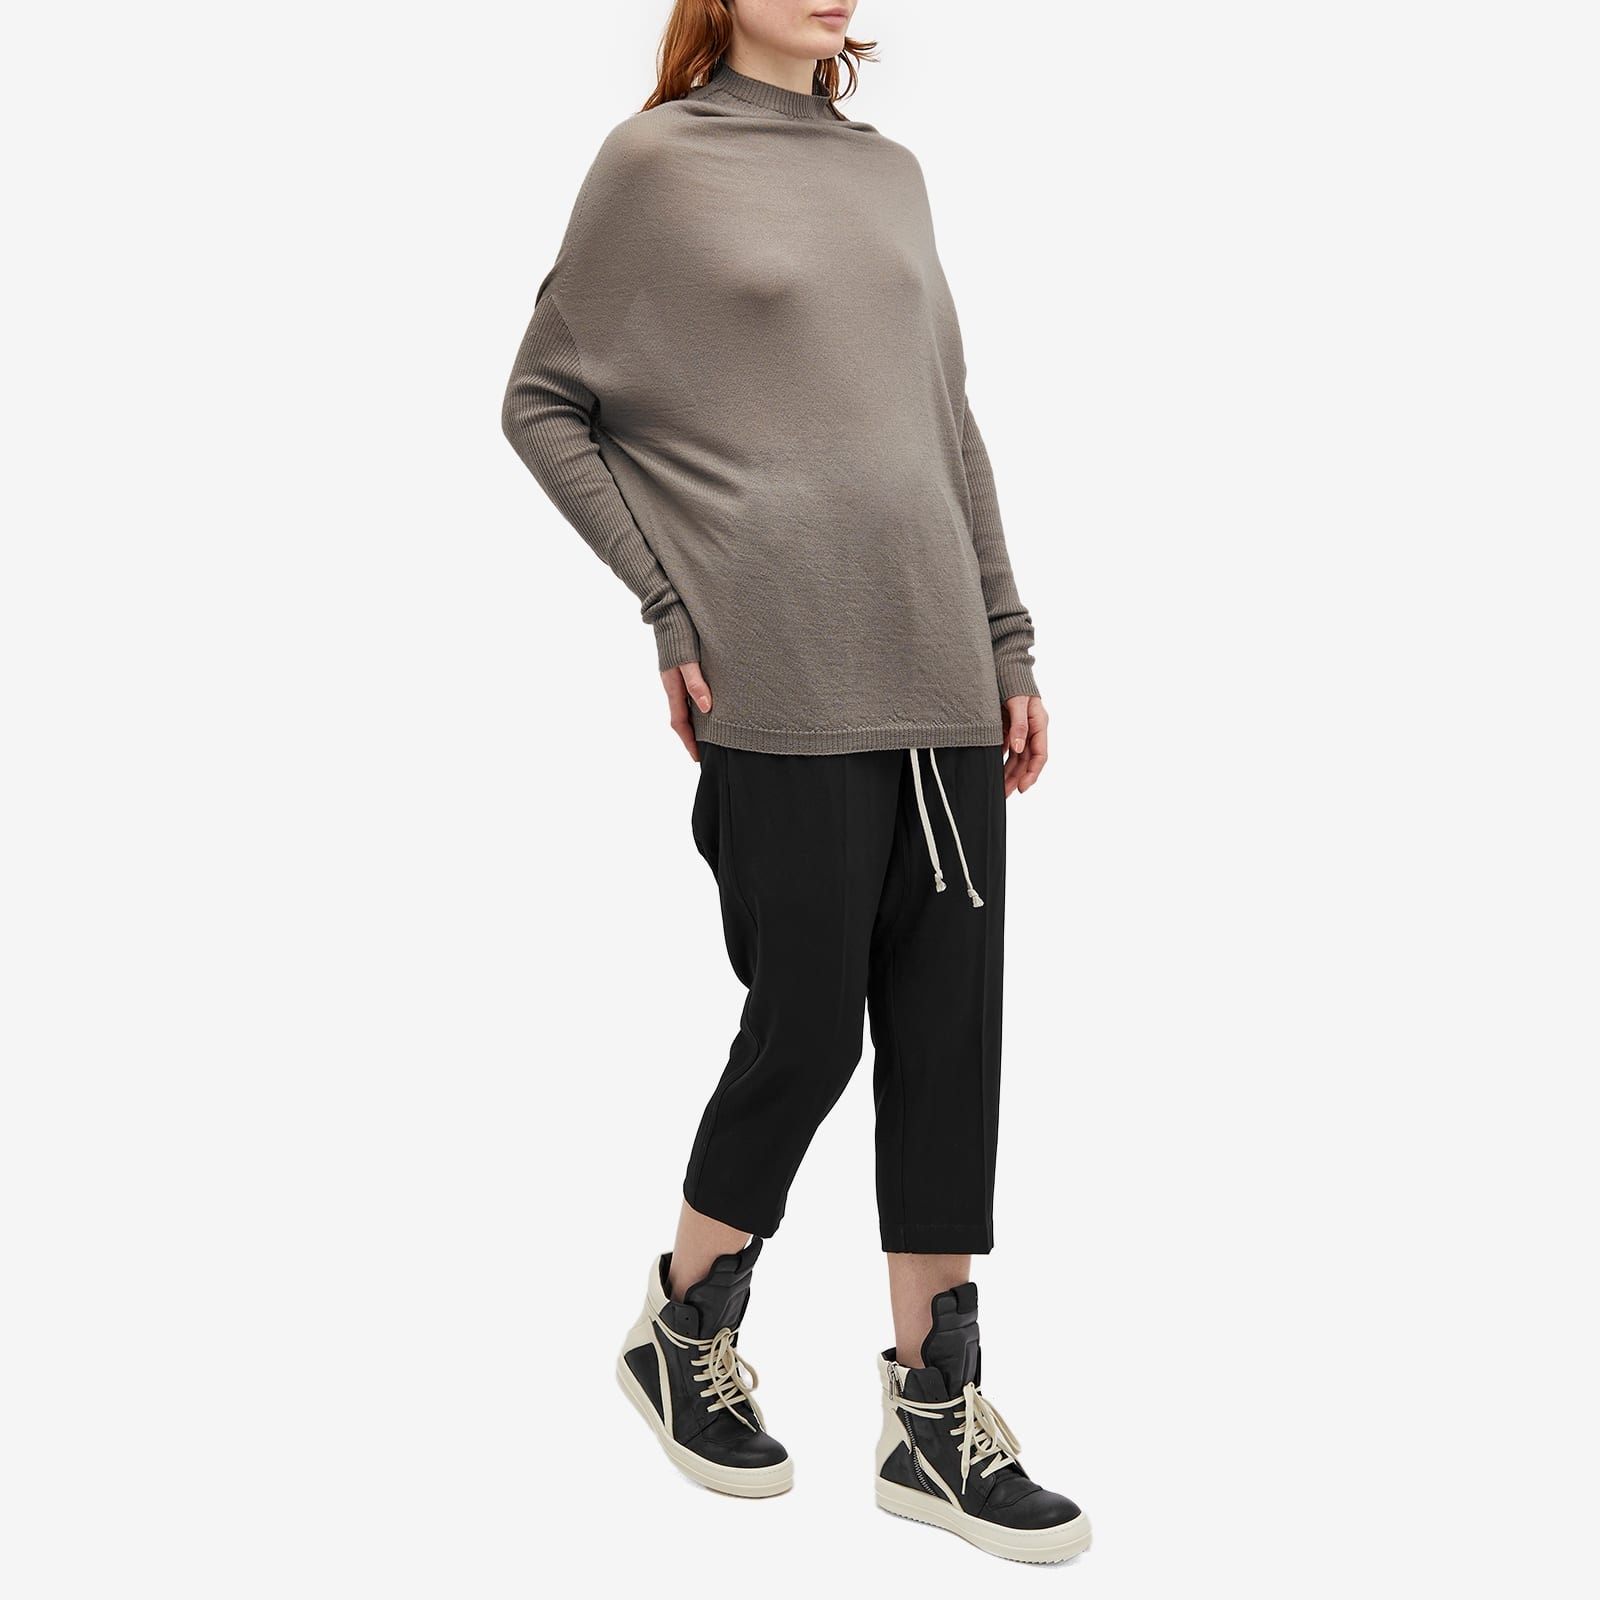 Rick Owens Crater Knit Top - 4